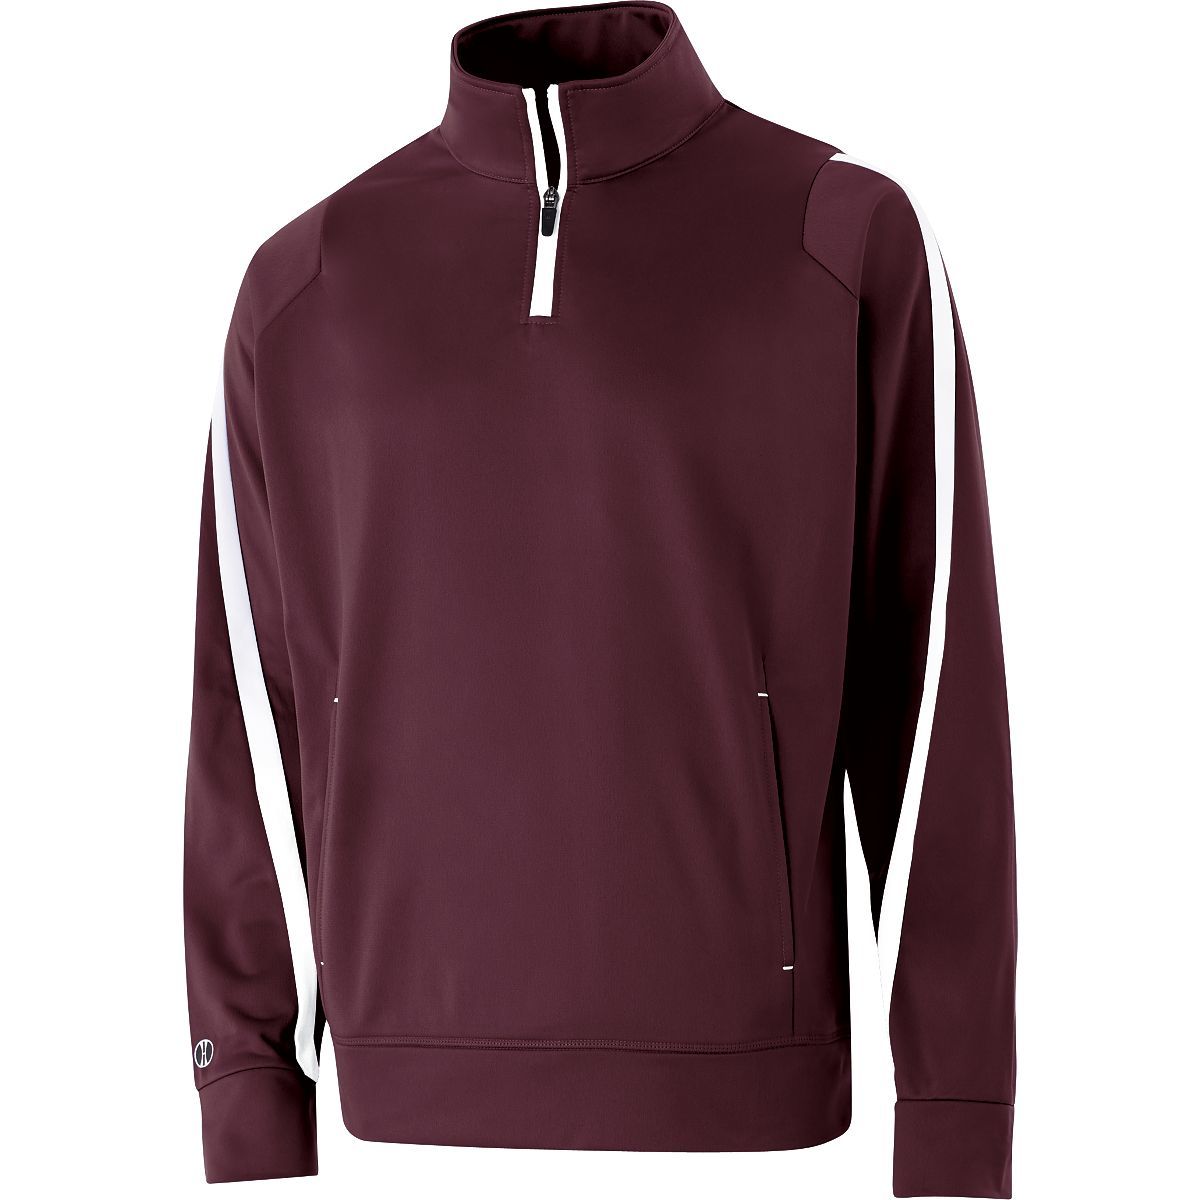 Holloway Determination Pullover in Maroon/White  -Part of the Adult, Adult-Pullover, Holloway, Outerwear product lines at KanaleyCreations.com